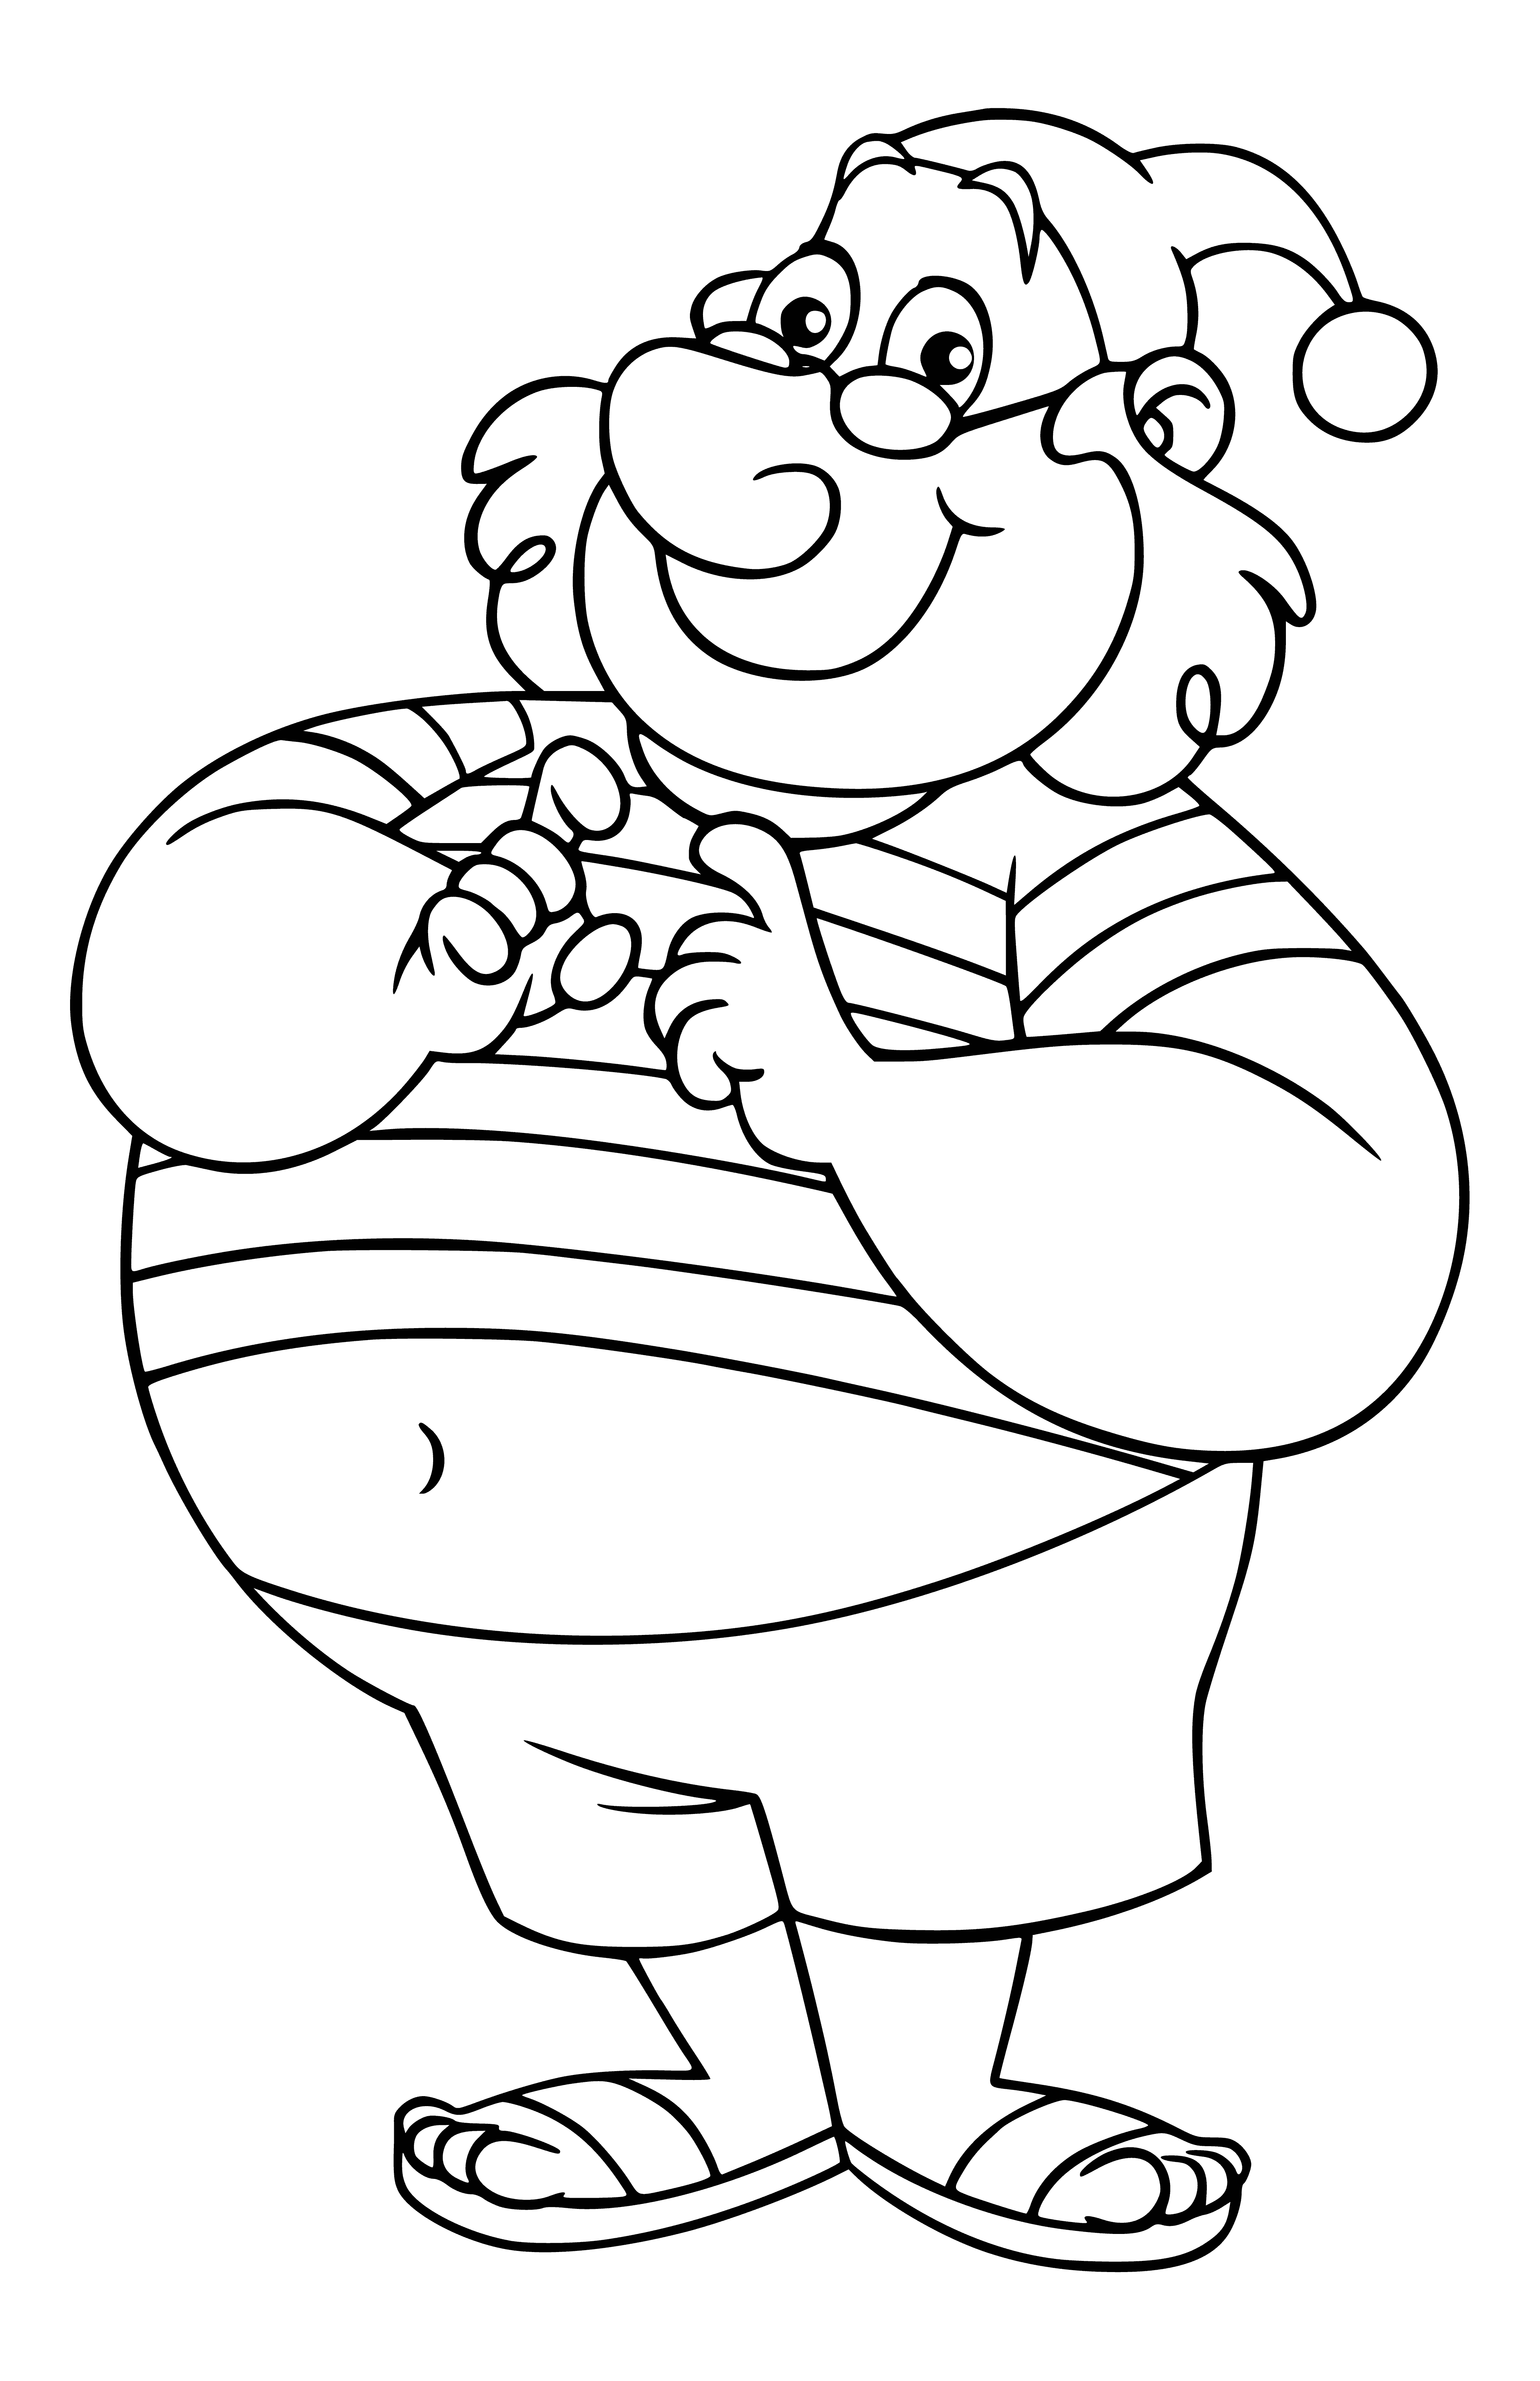 Pirate Mr. Smee coloring page